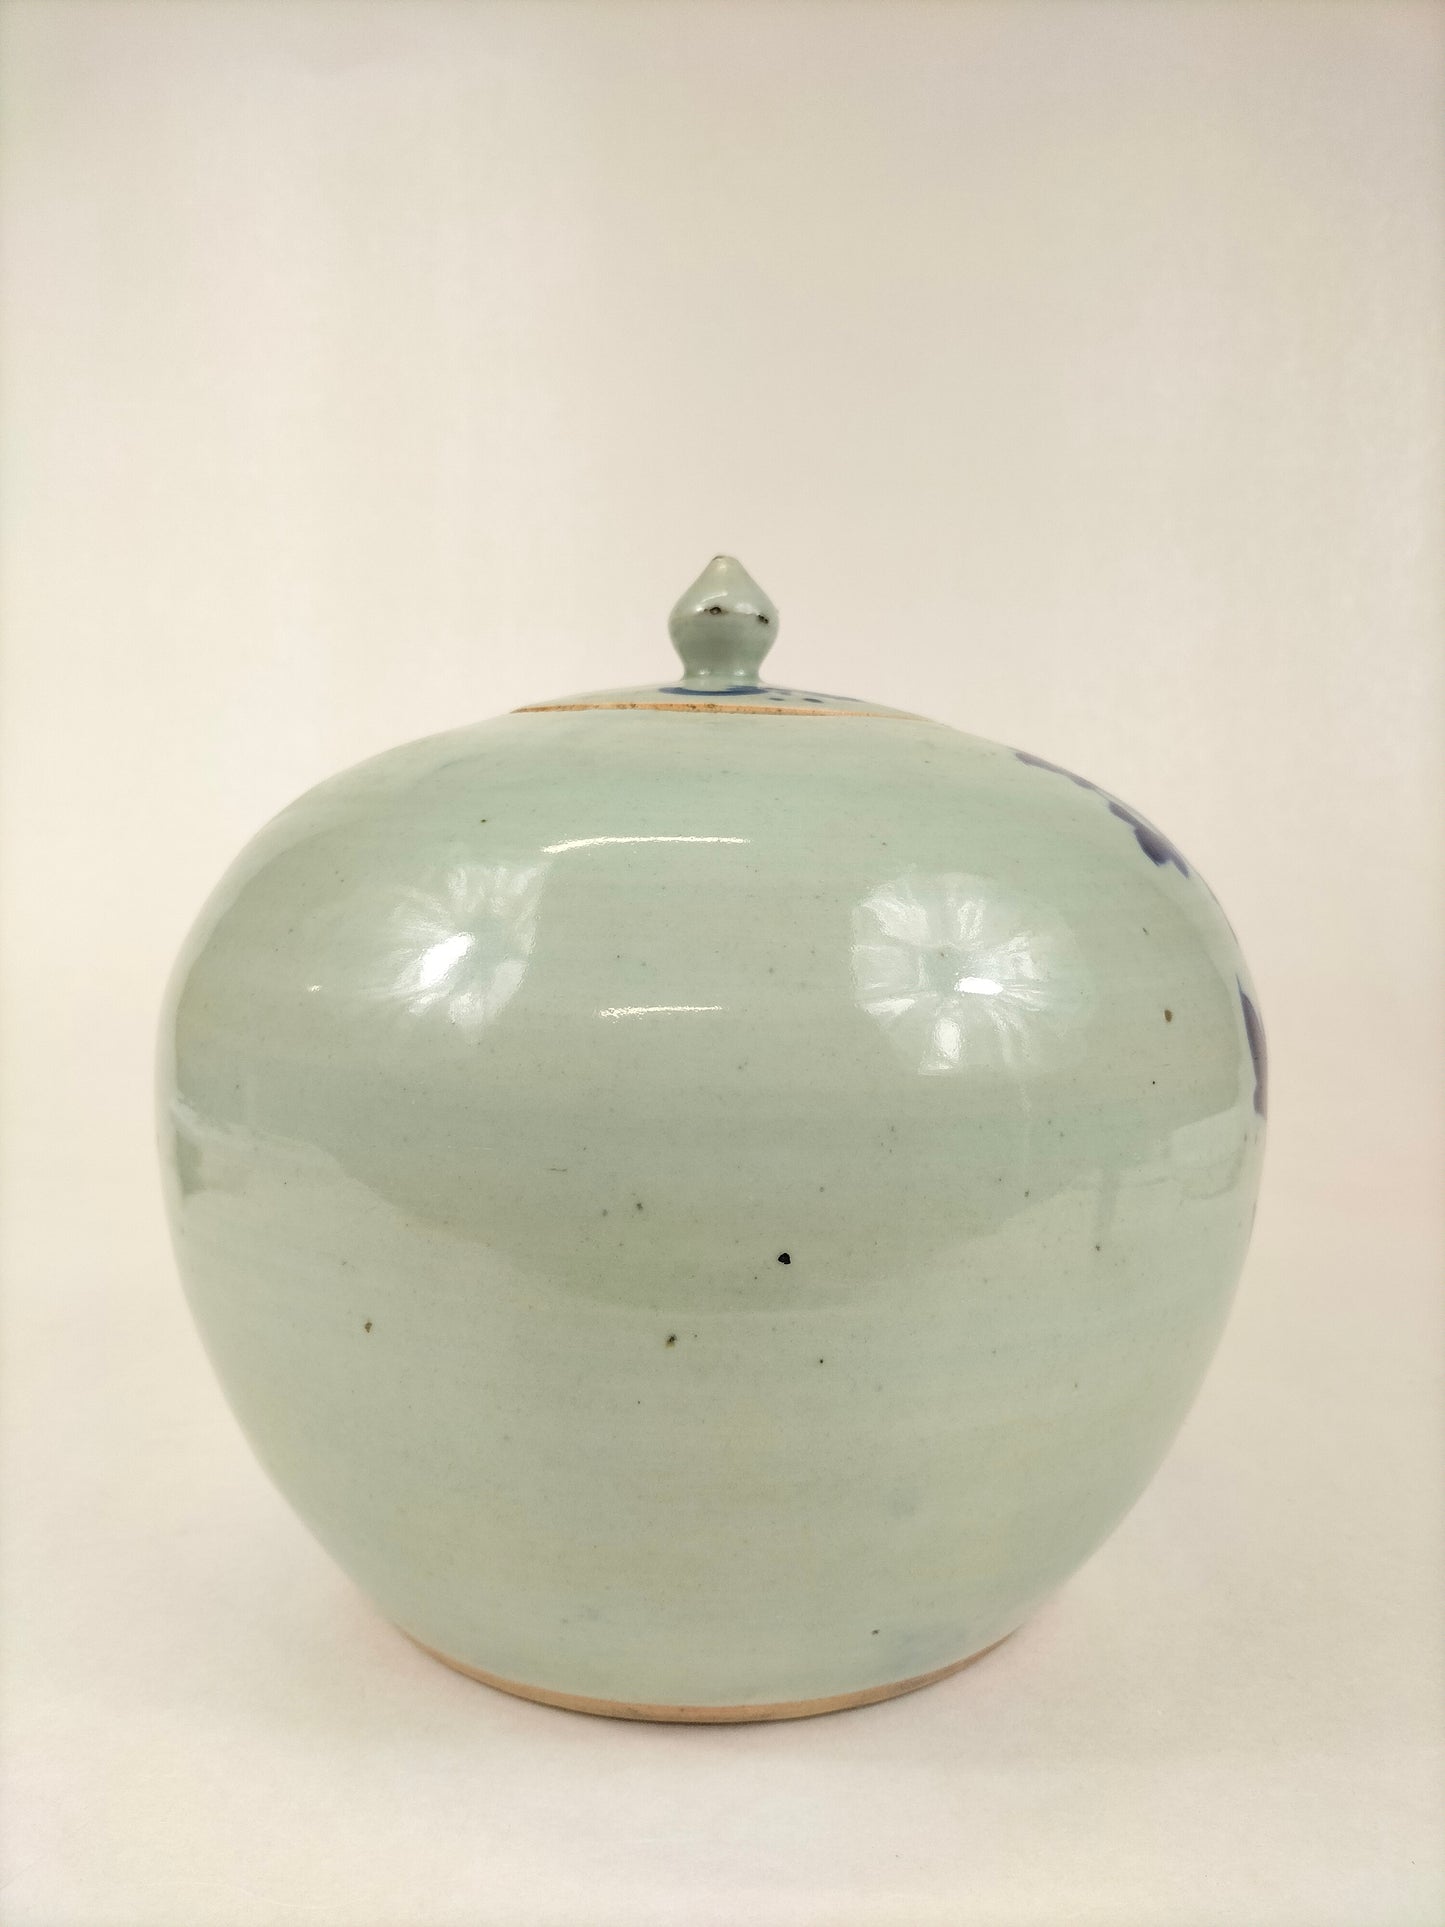 Antique Chinese celadon ginger jar decorated with peacock and flowers // Qing Dynasty - 19th century